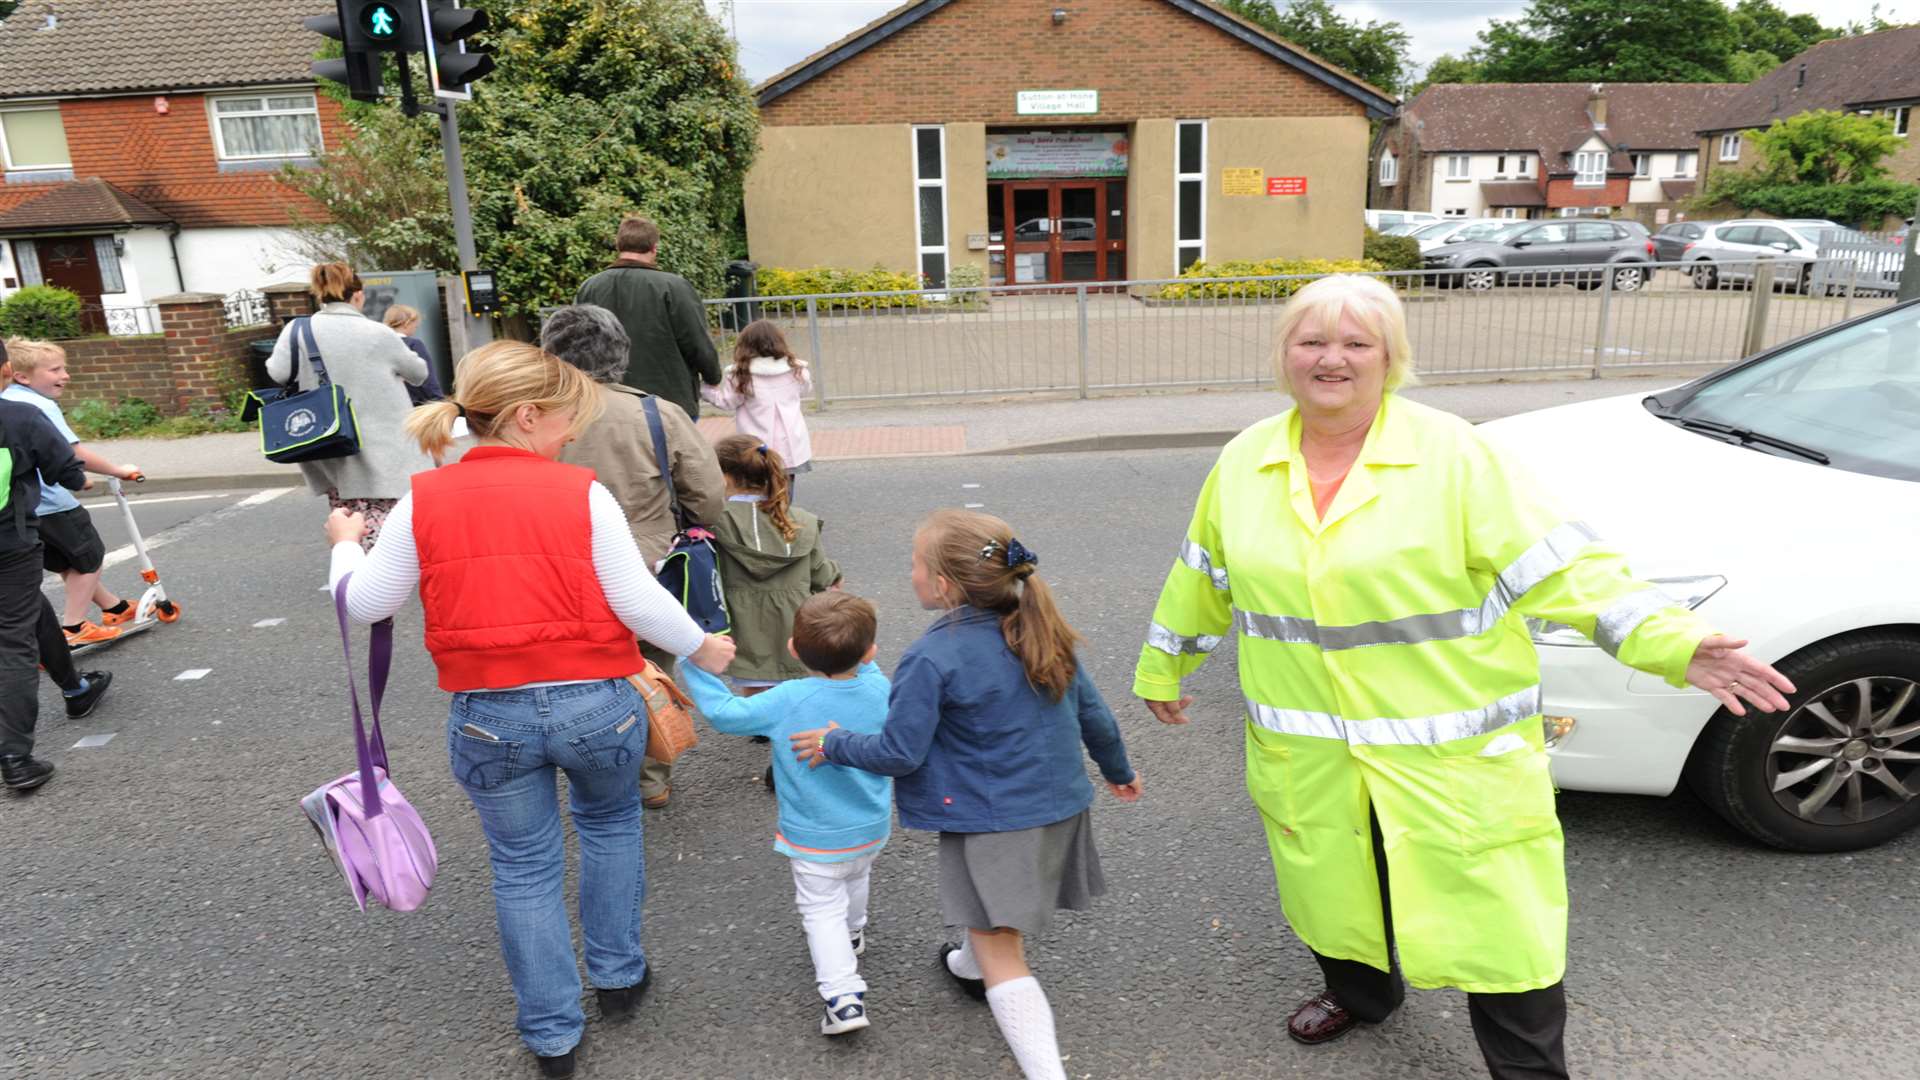 Wendy has been shepherding children safely across the road for the past 35 years